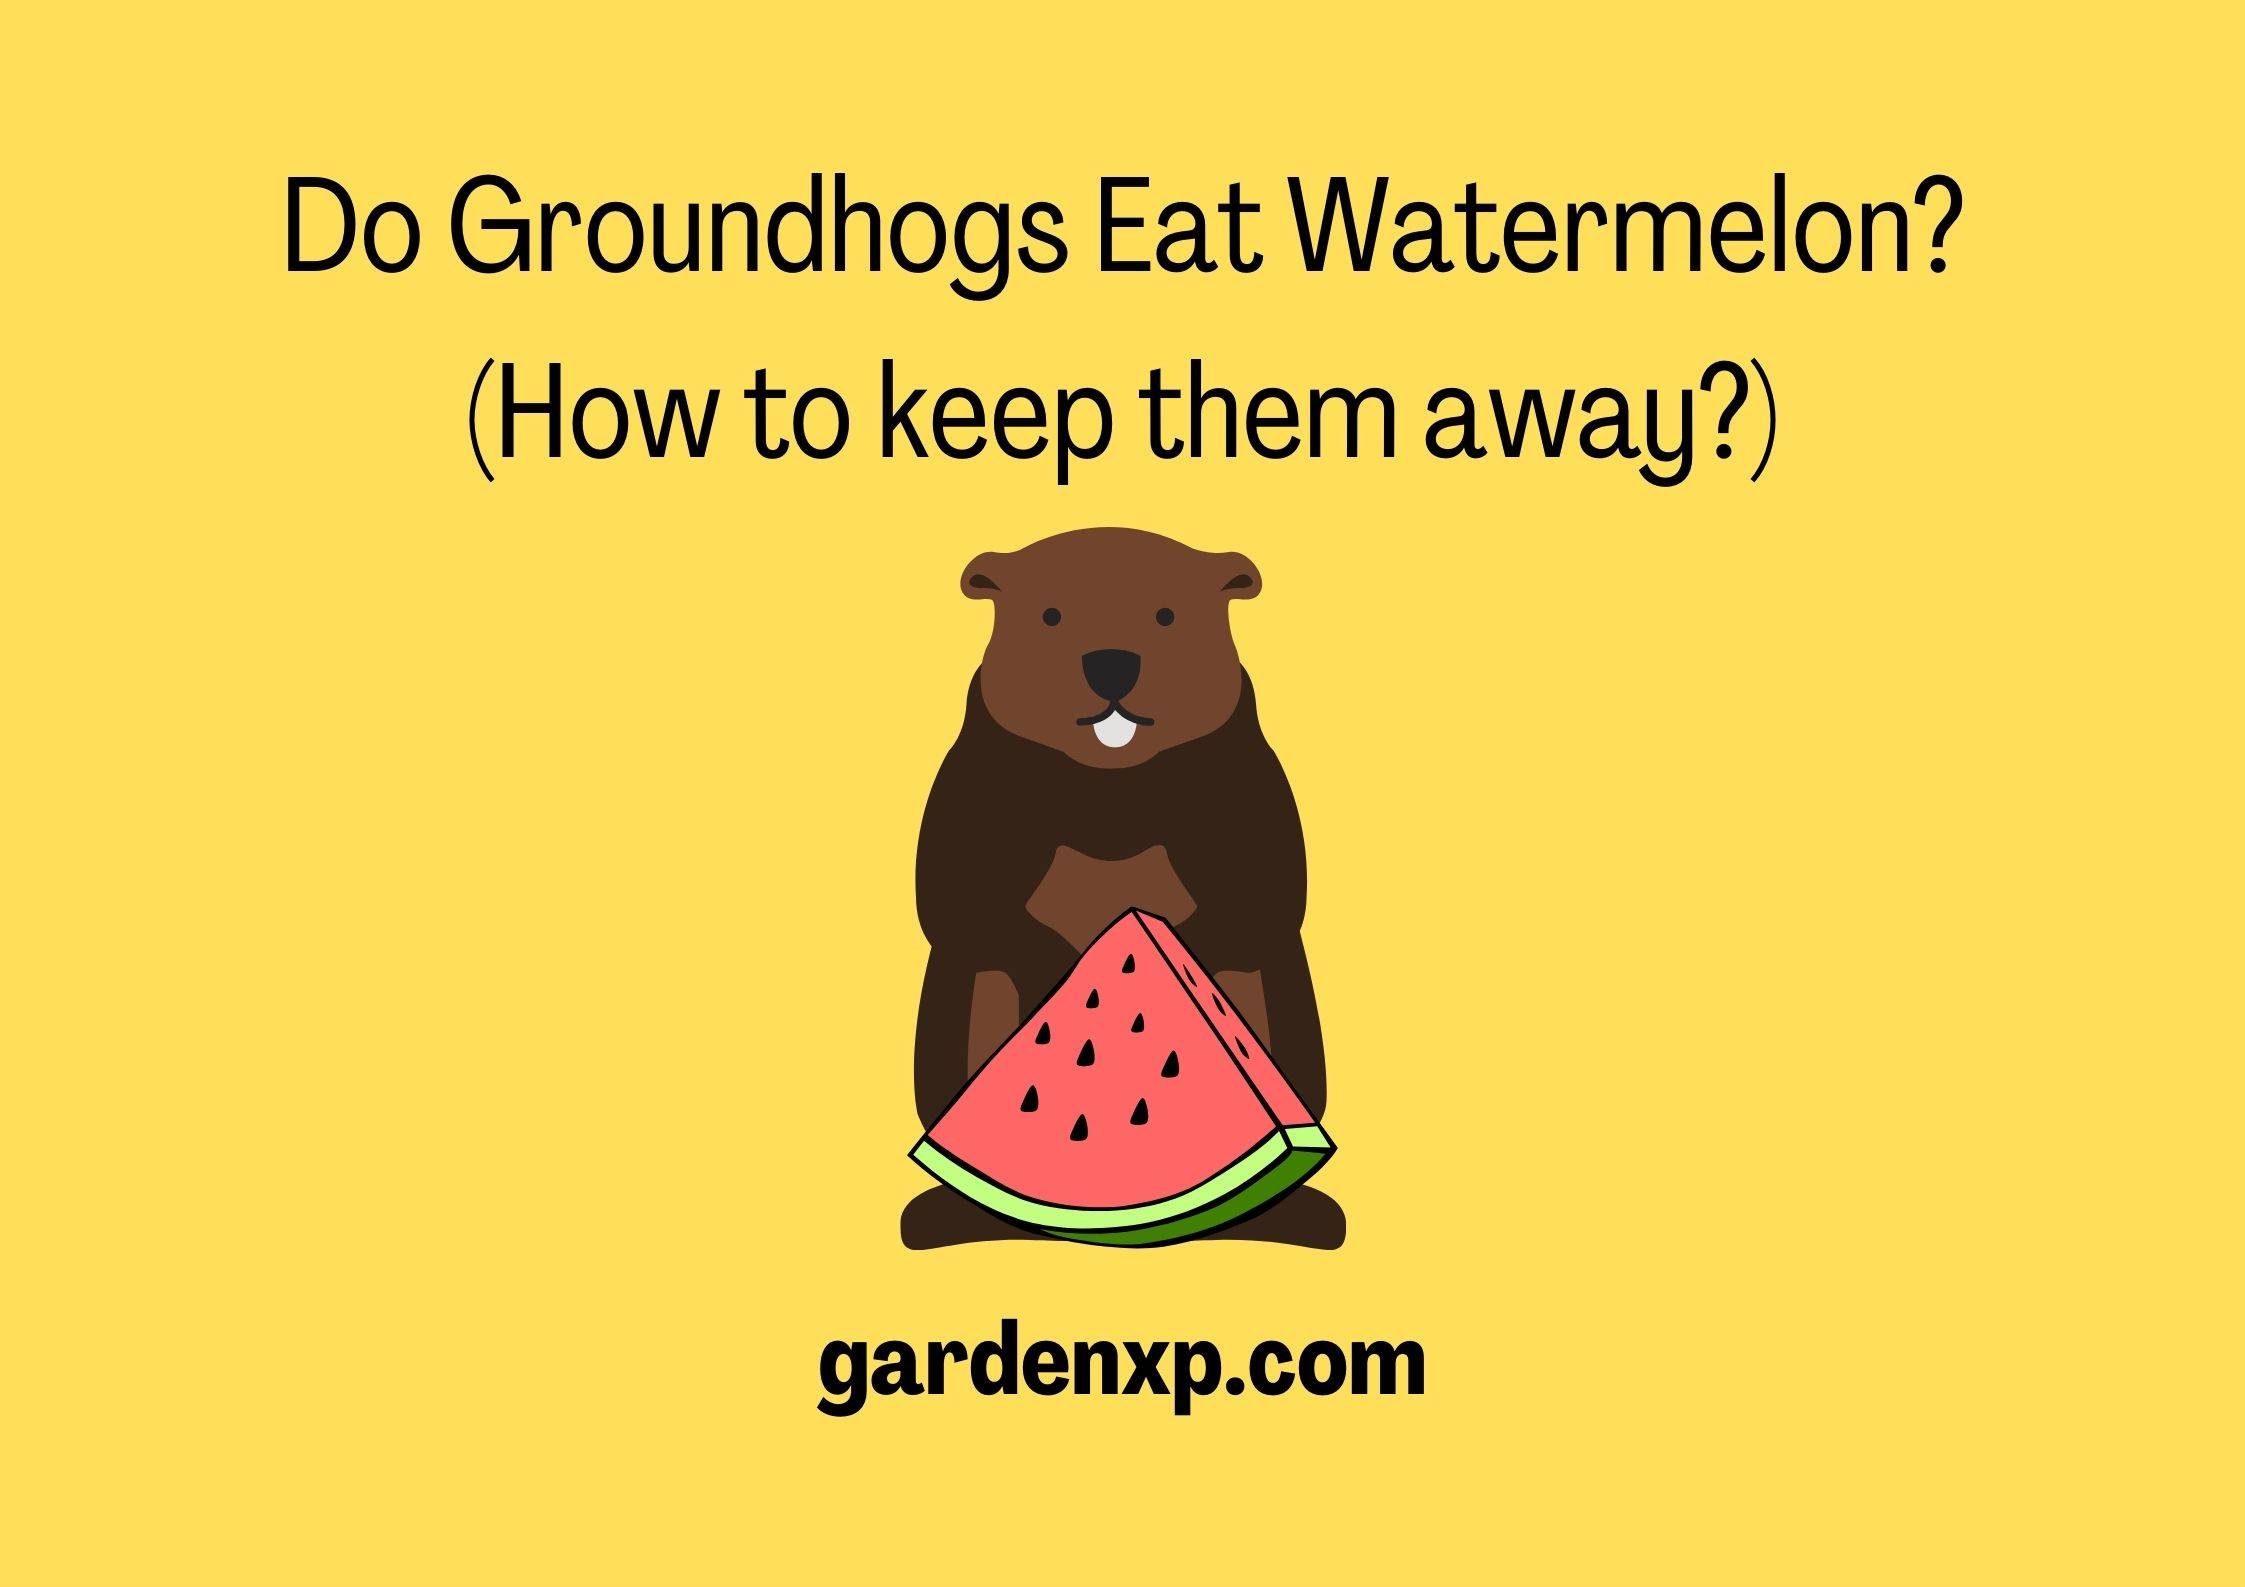 Do Groundhogs Eat Watermelon? (How to keep them away?)